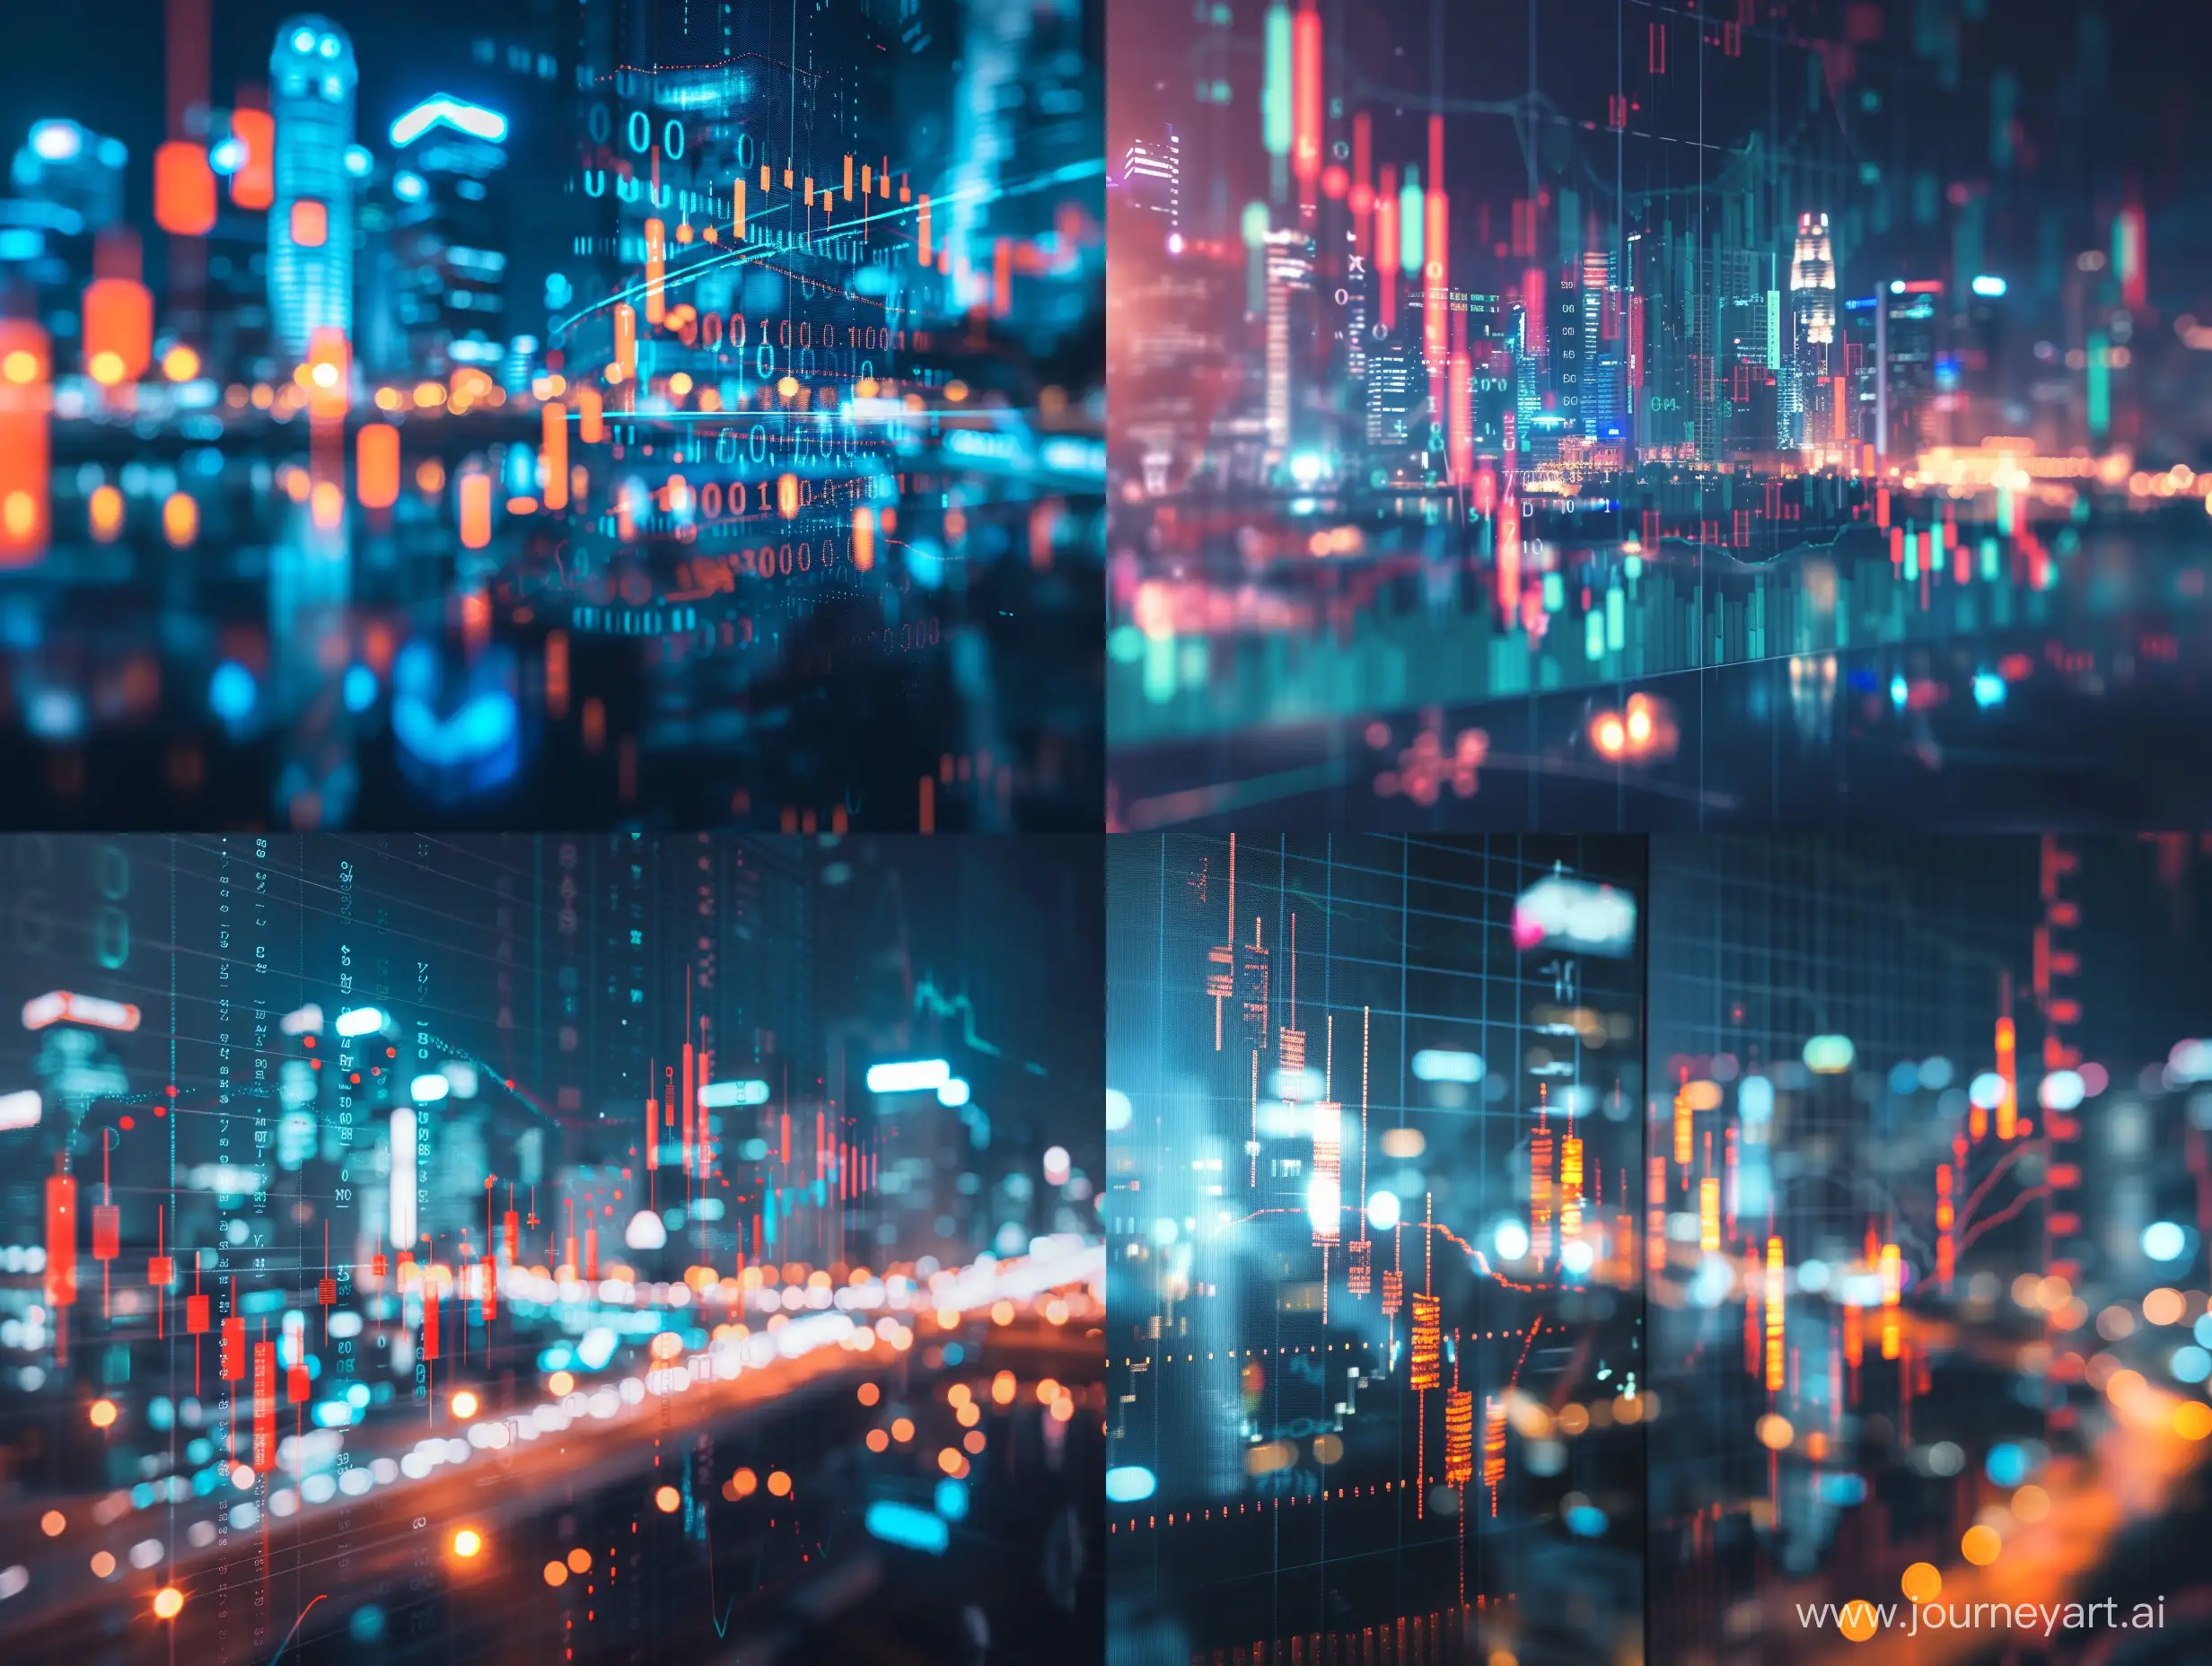 Abstract glowing big data forex candlestick chart on blurry city backdrop. Trade, technology investment and analysis concept. Double exposure